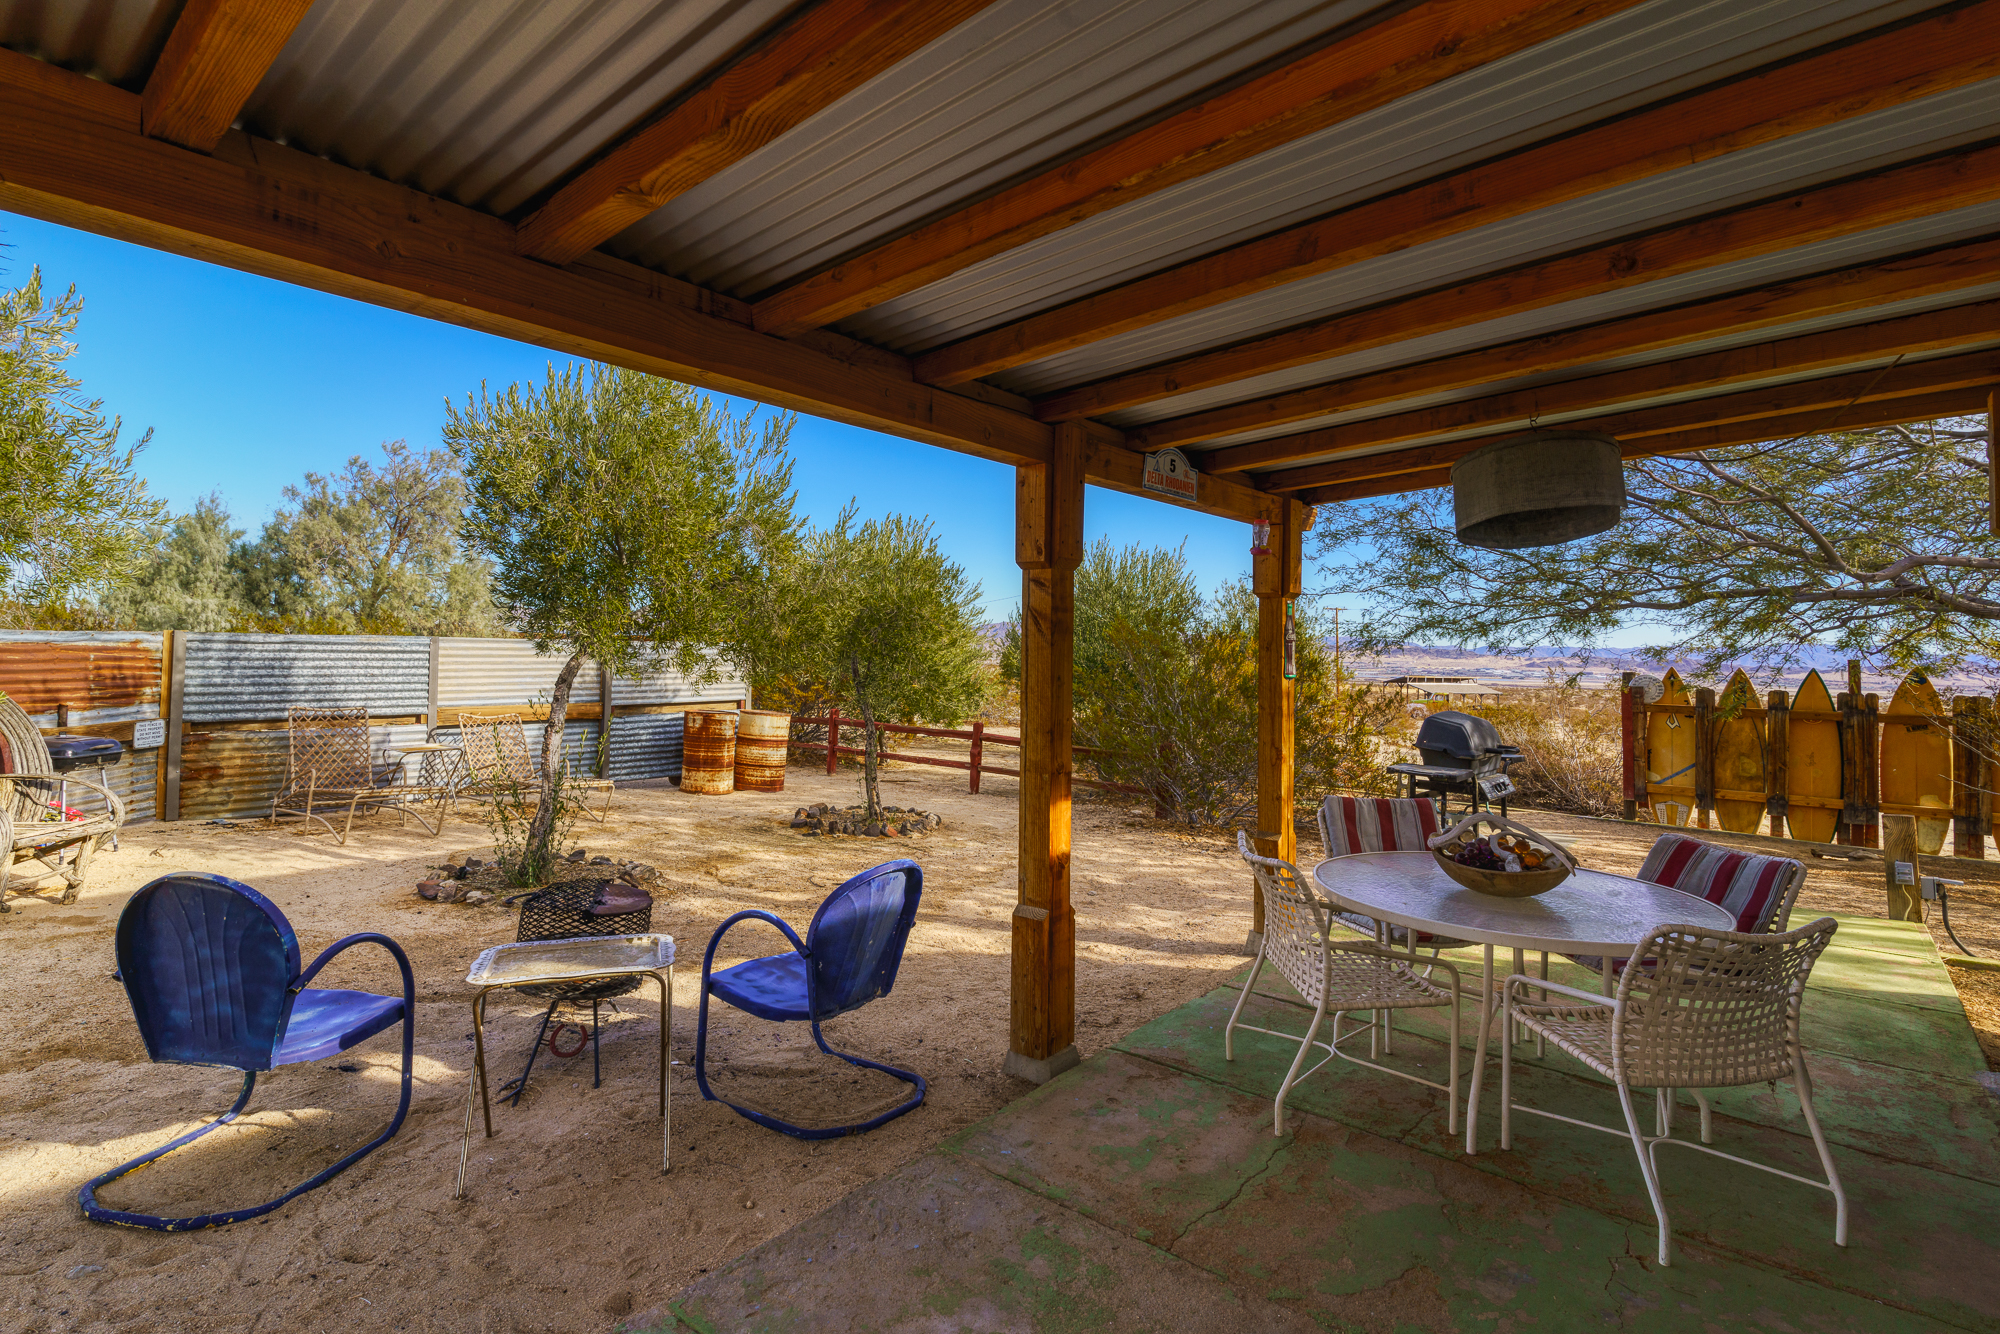 Patio of the vacation rental containing a large round table with four seats to lounge at.